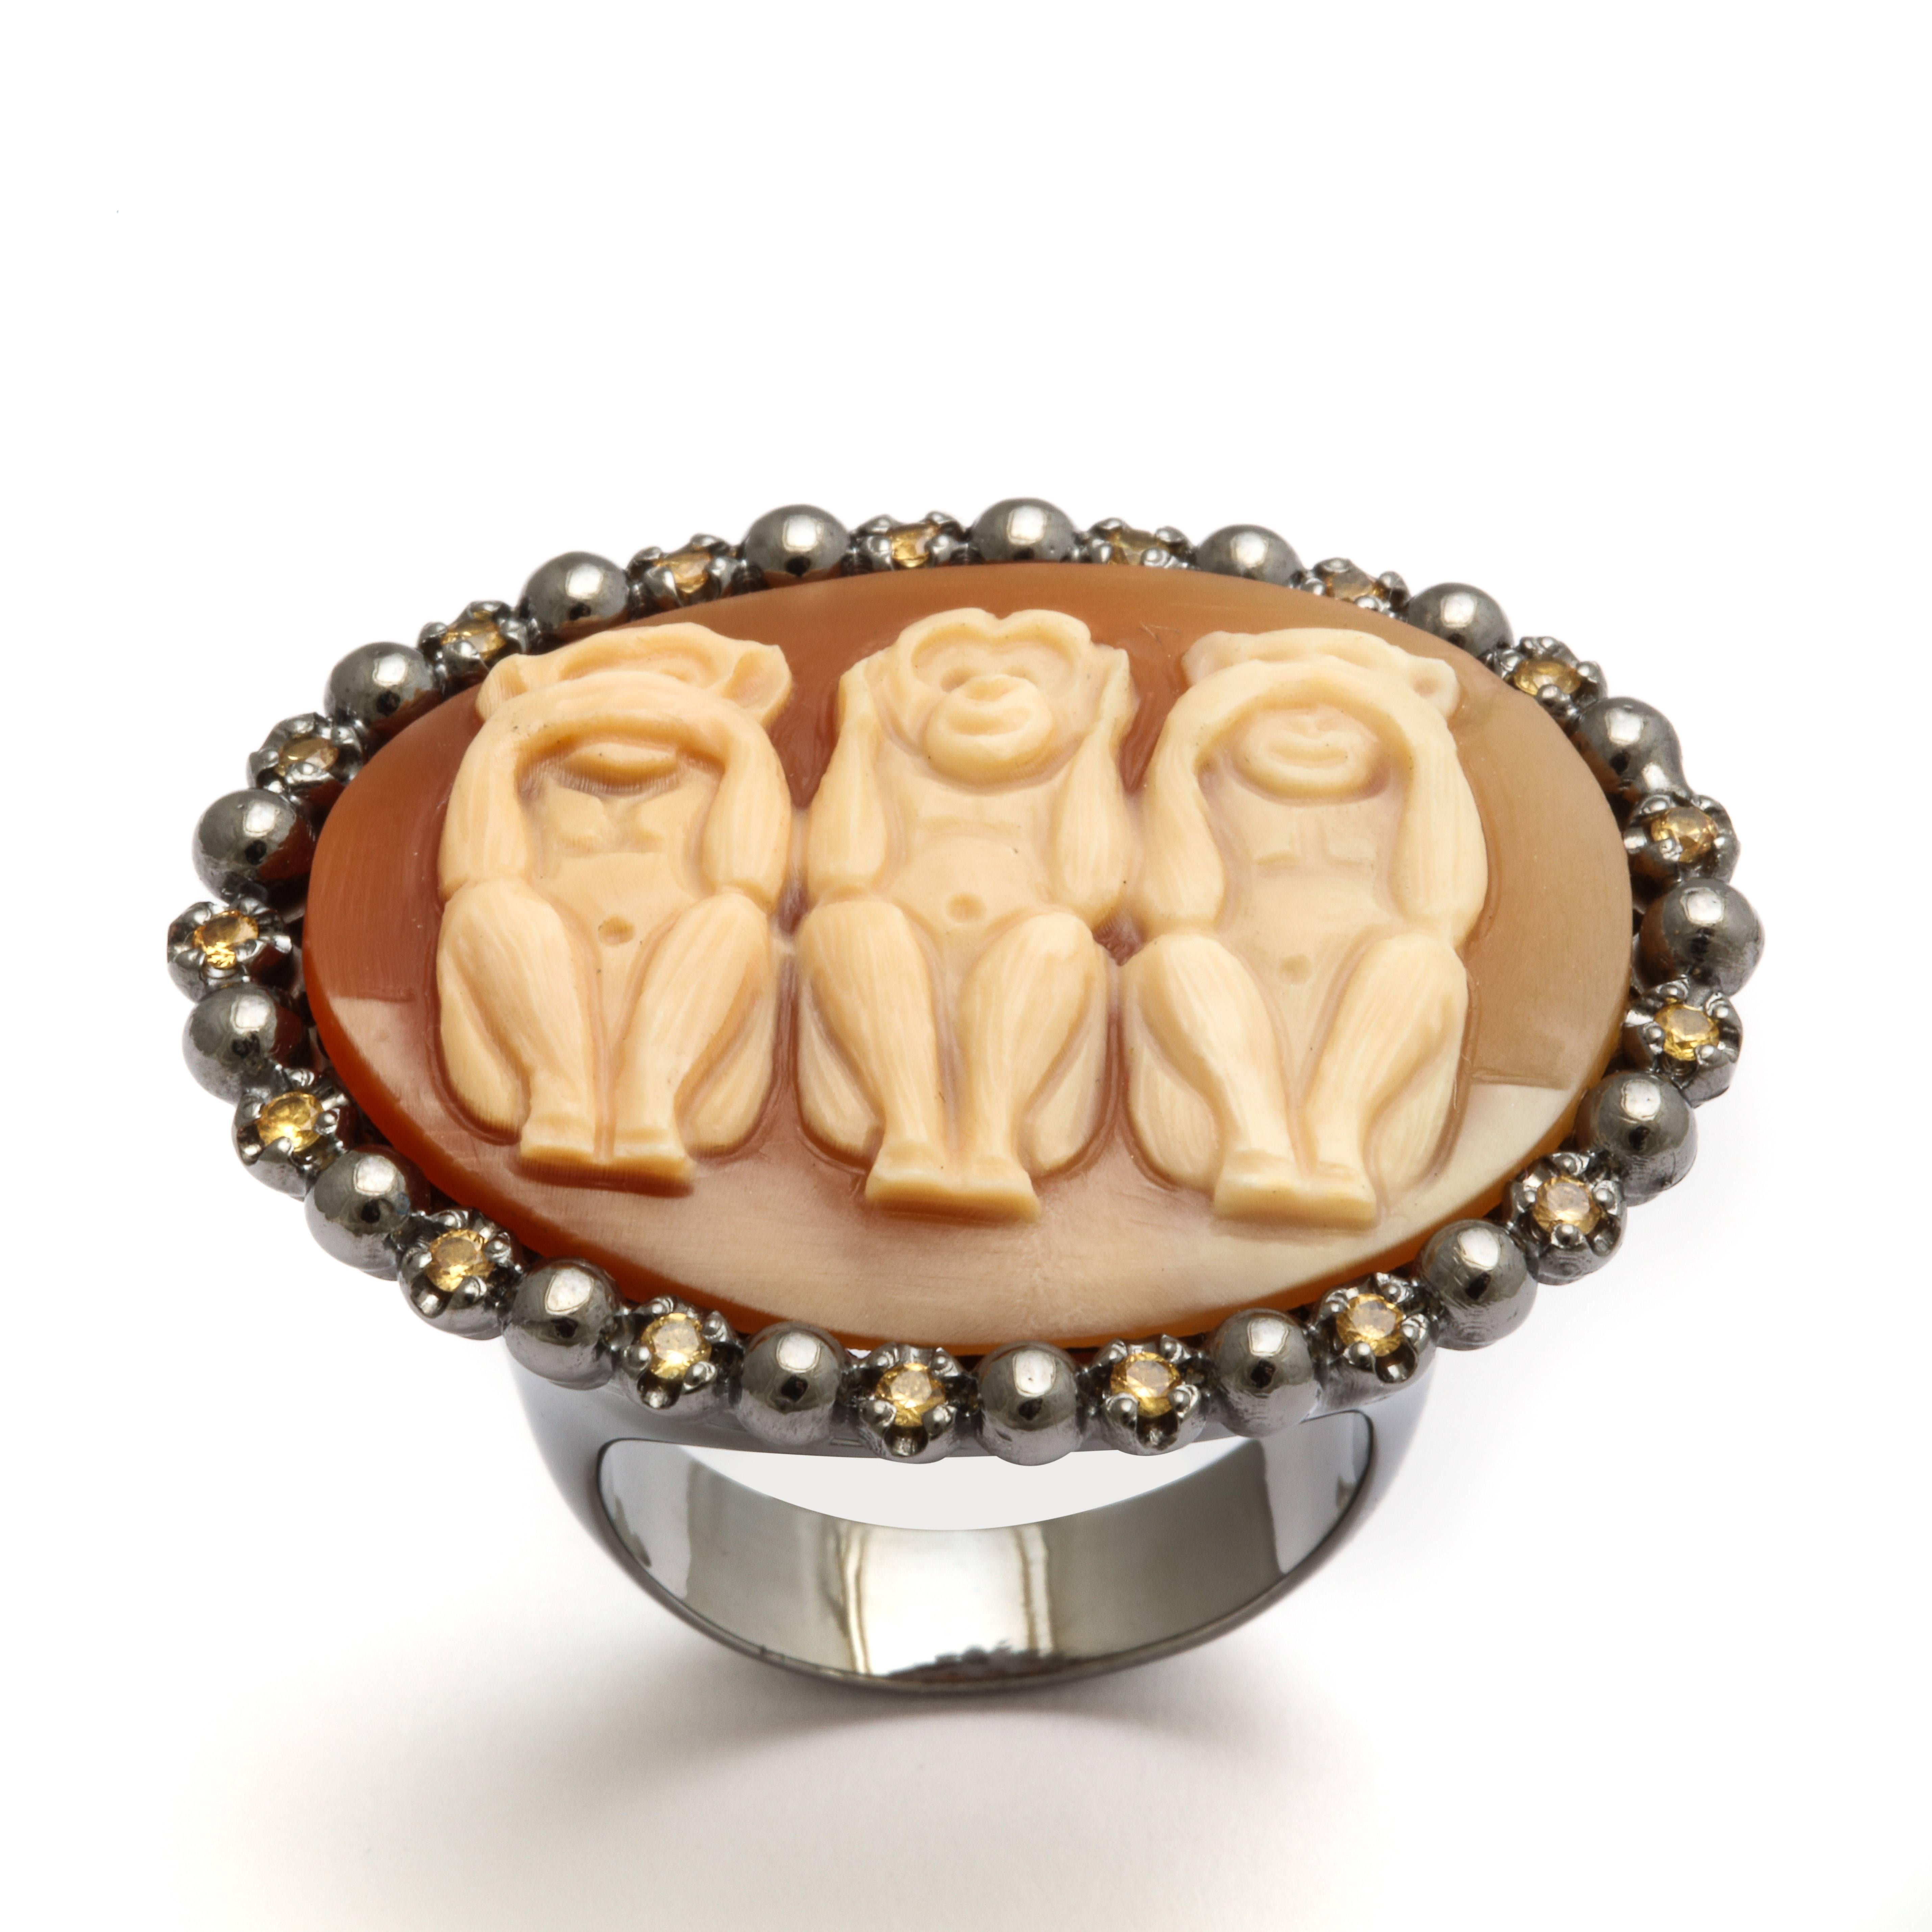 30mm sardonyx cameo hand-carved, set in sterling silver rose rhodium plated ring with yellow sapphires.
Ring Size: 7US
*Being these are hand crafted one of a kind designs, not all ring sizes might be immediately available. We offer custom sizing